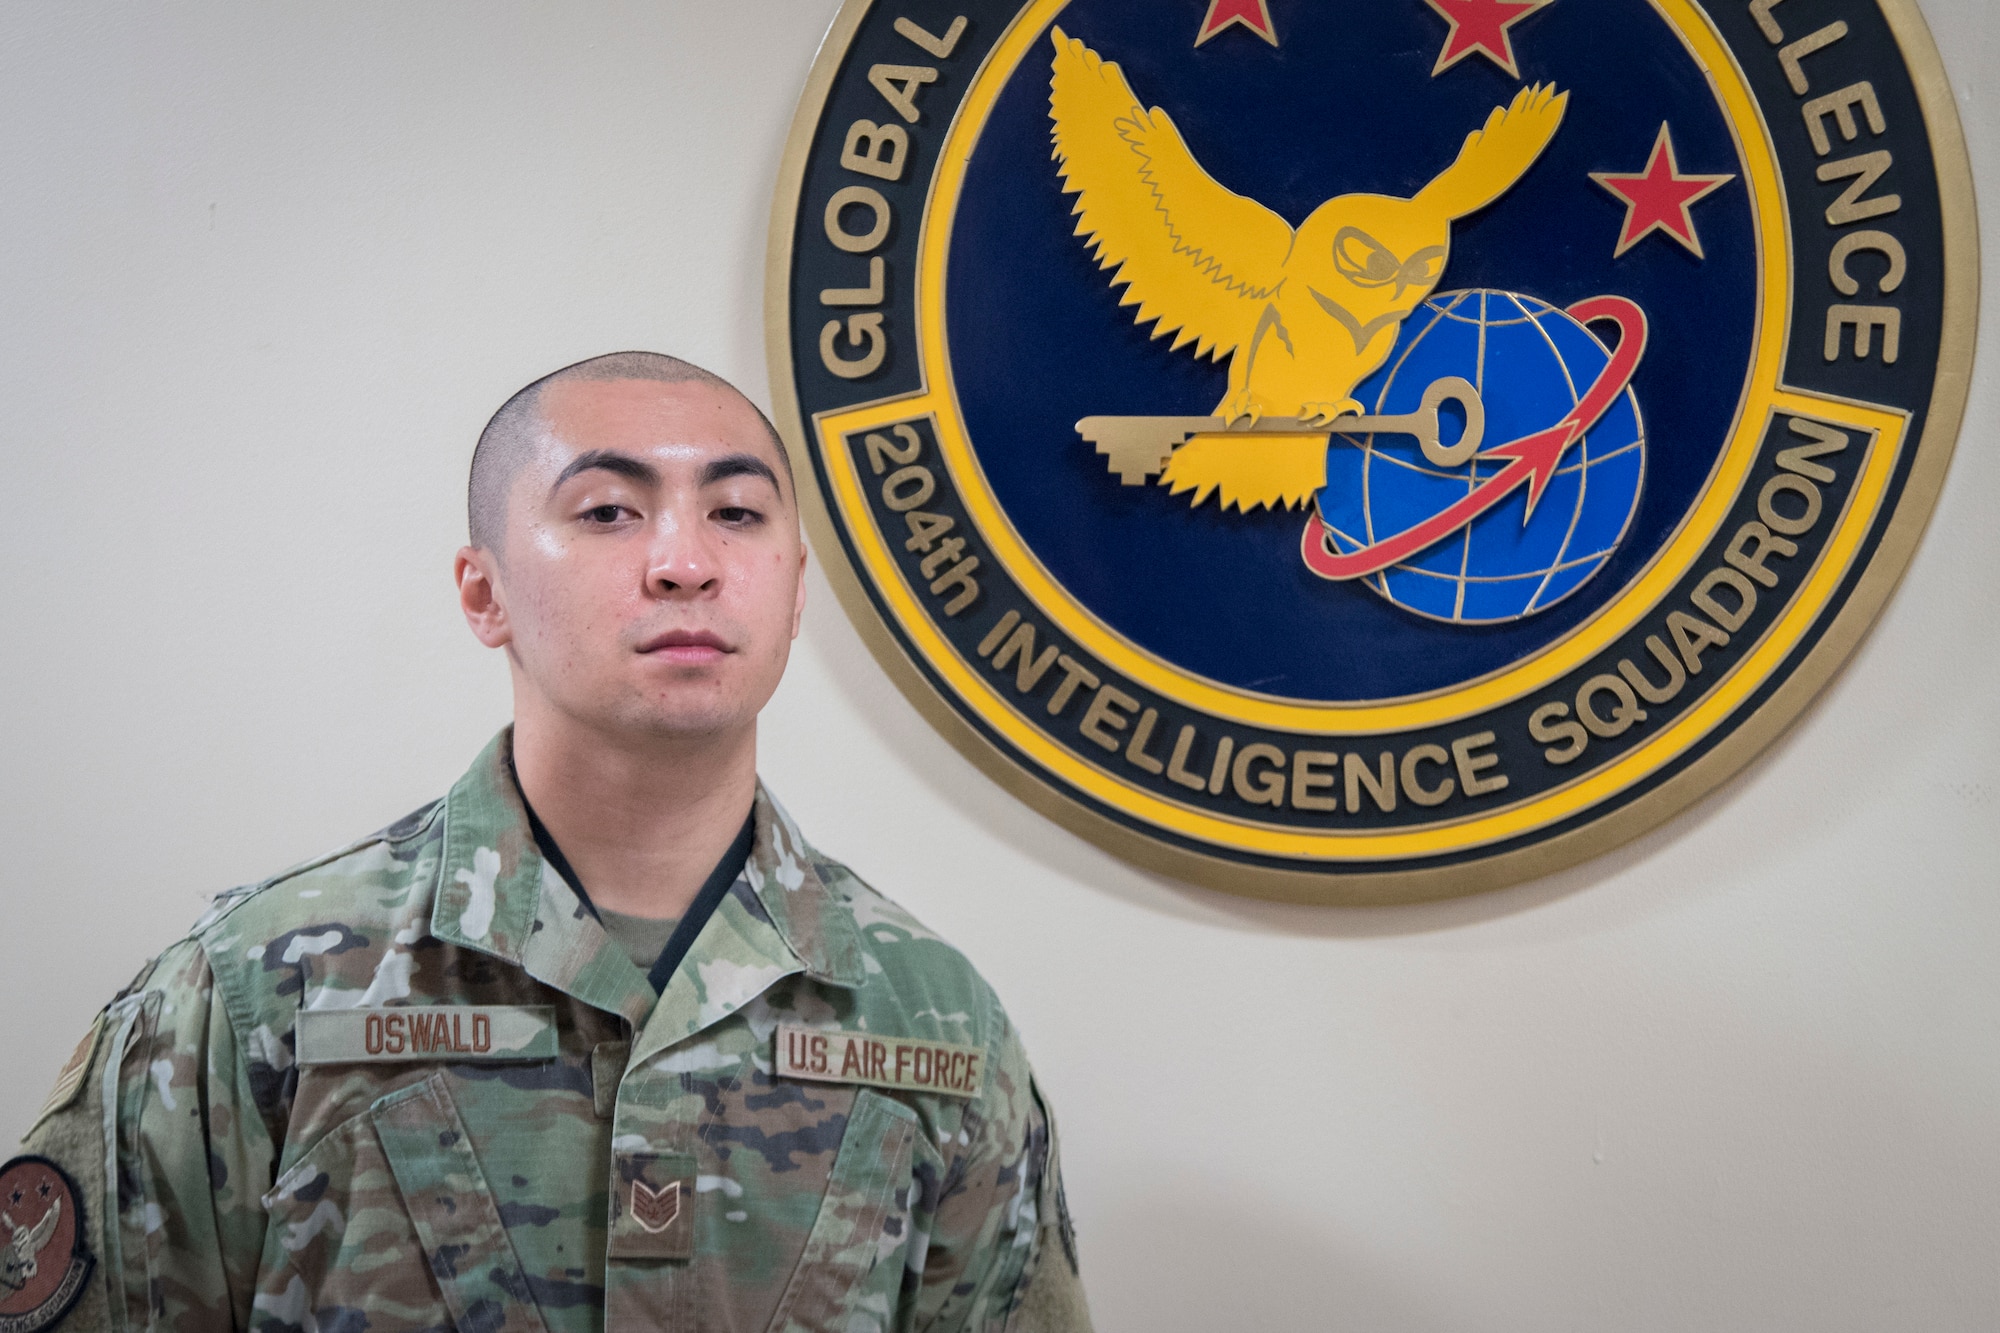 New Jersey Air National Guard Staff Sgt. Joseph Oswald stands in front of the 204th Intelligence Squadron's emblem located in the 108th Operations Group building on Joint Base McGuire-Dix-Lakehurst, N.J., Jan. 9, 2022.